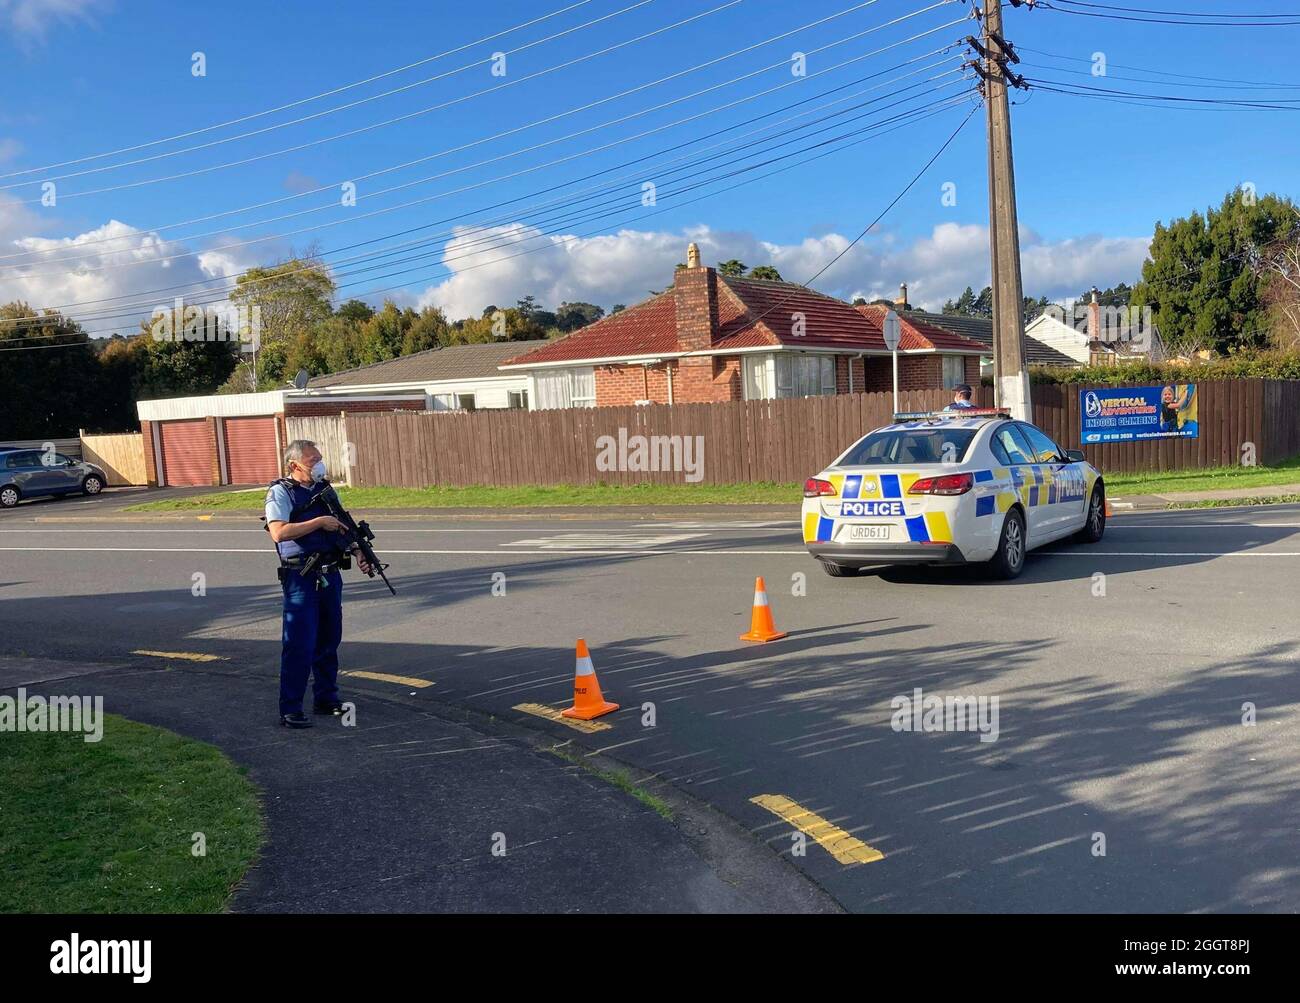 Auckland. 3rd Sep, 2021. A police officer stands guard near the New Lynn supermarket in Auckland, New Zealand, Sept. 3, 2021. New Zealand Prime Minister Jacinda Ardern confirmed that the violent attack that happened at New Lynn supermarket in Auckland at 2:40 p.m. local time Friday was a "terrorist attack" carried out by an "extremist." Credit: Xinhua/Alamy Live News Stock Photo